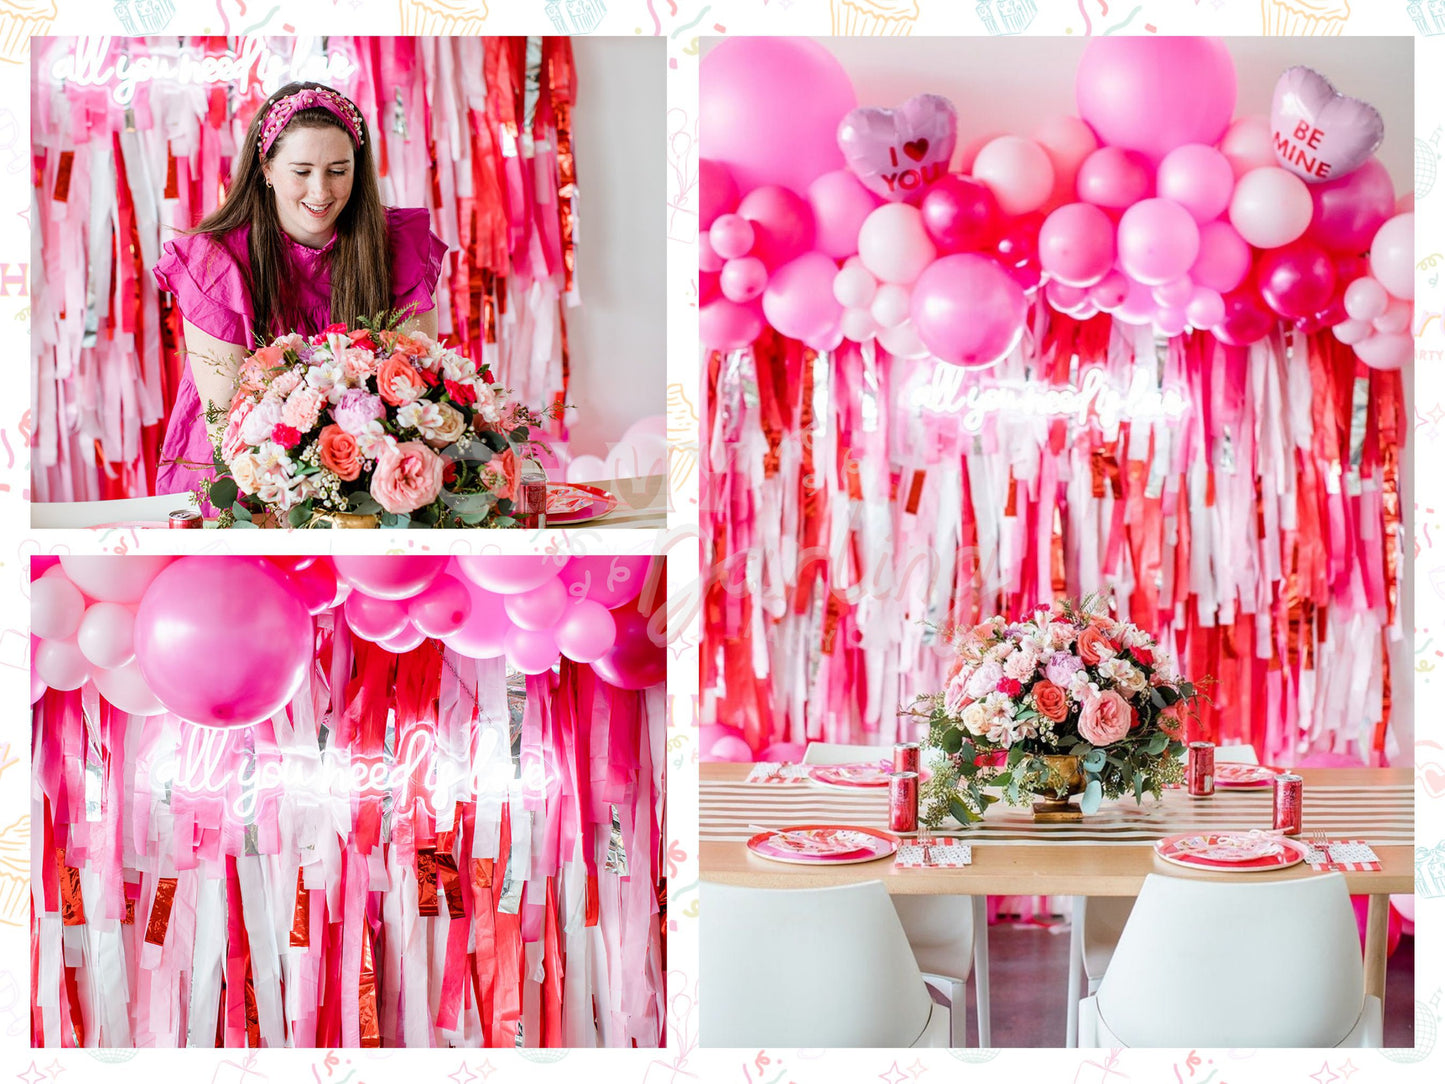 Sweetheart Backdrop-Fringe Backdrop-Party Decor-Oh My Darling Party Co-Oh My Darling Party Co-baby pink, bachelorette, bachelorette party, backdrops for party, balloon garlands, barbie, be my valentine, blush, bubblegum, candy pink, cream, dance, florals, fringe garland, Fringe Streamers, girl party, metalic silver, metallic red, OMDPC, party backdrops, Pink, pink baby shower, pink bachelorette, PINK BACKDROP, pink halloween, pink party, princess, red, RED BACKDROP, SILVER BACKDROP, spring, standard, tassel